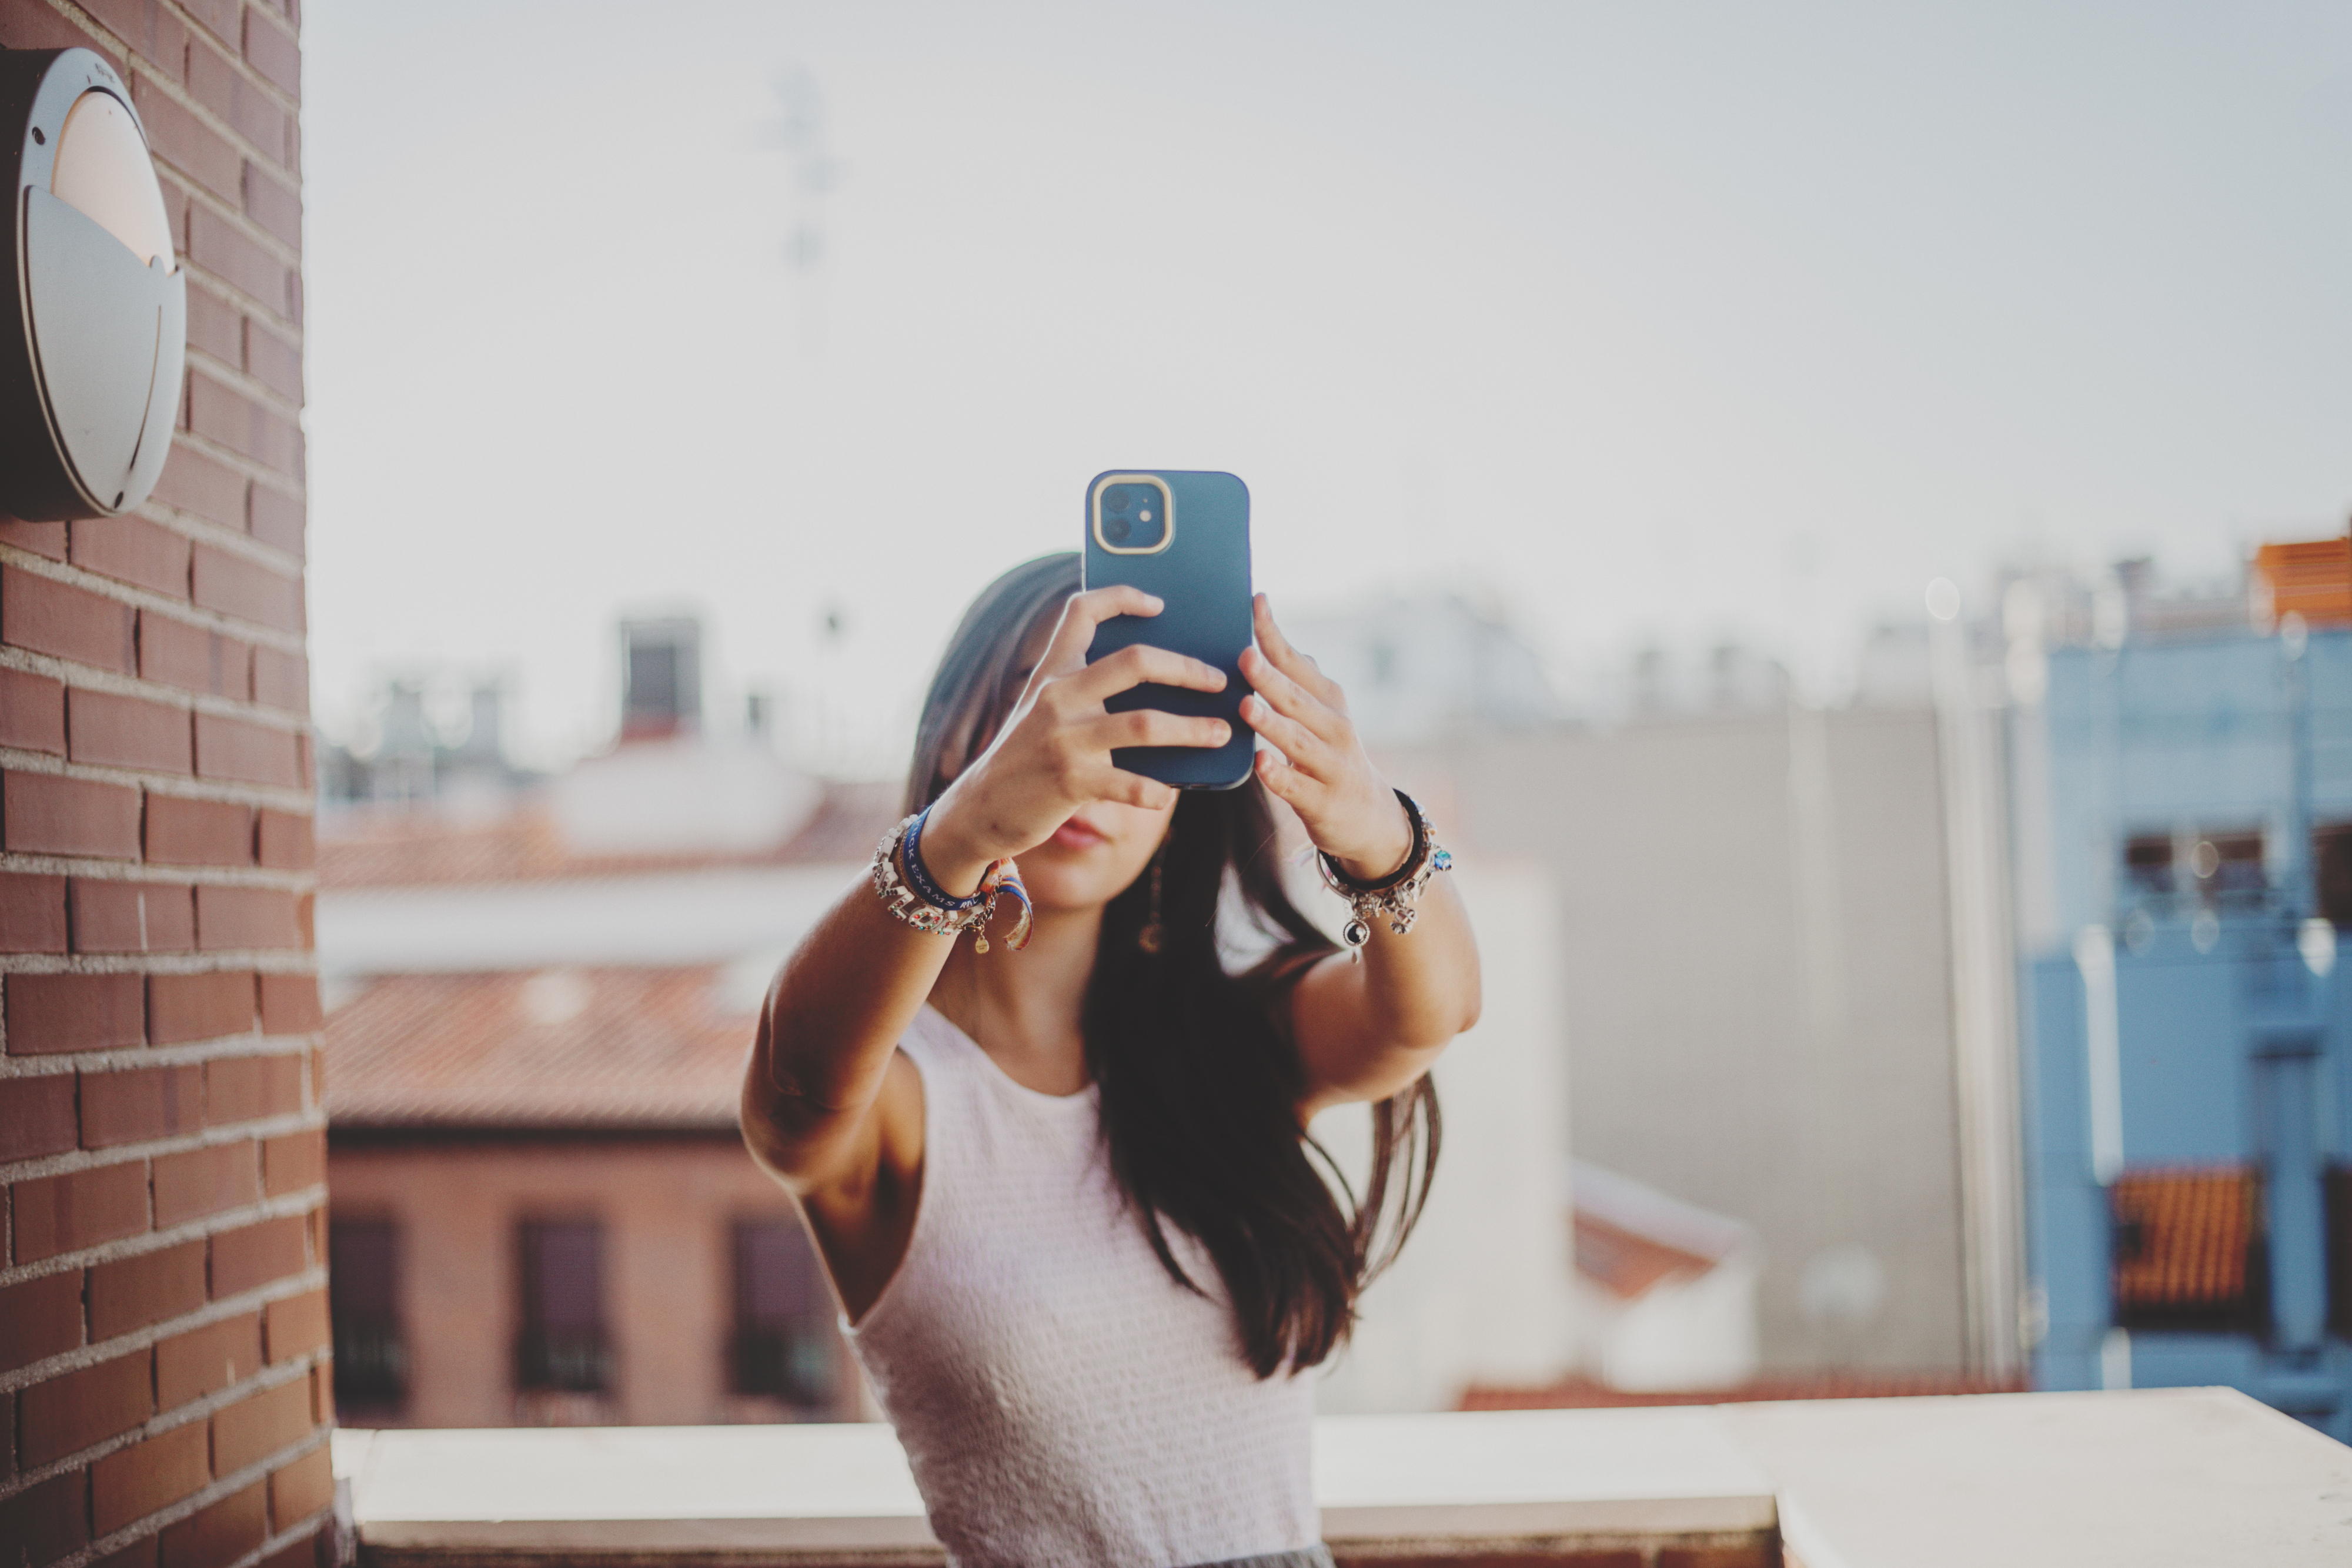 Woman taking a selfie on a balcony with smartphone, facing away from camera